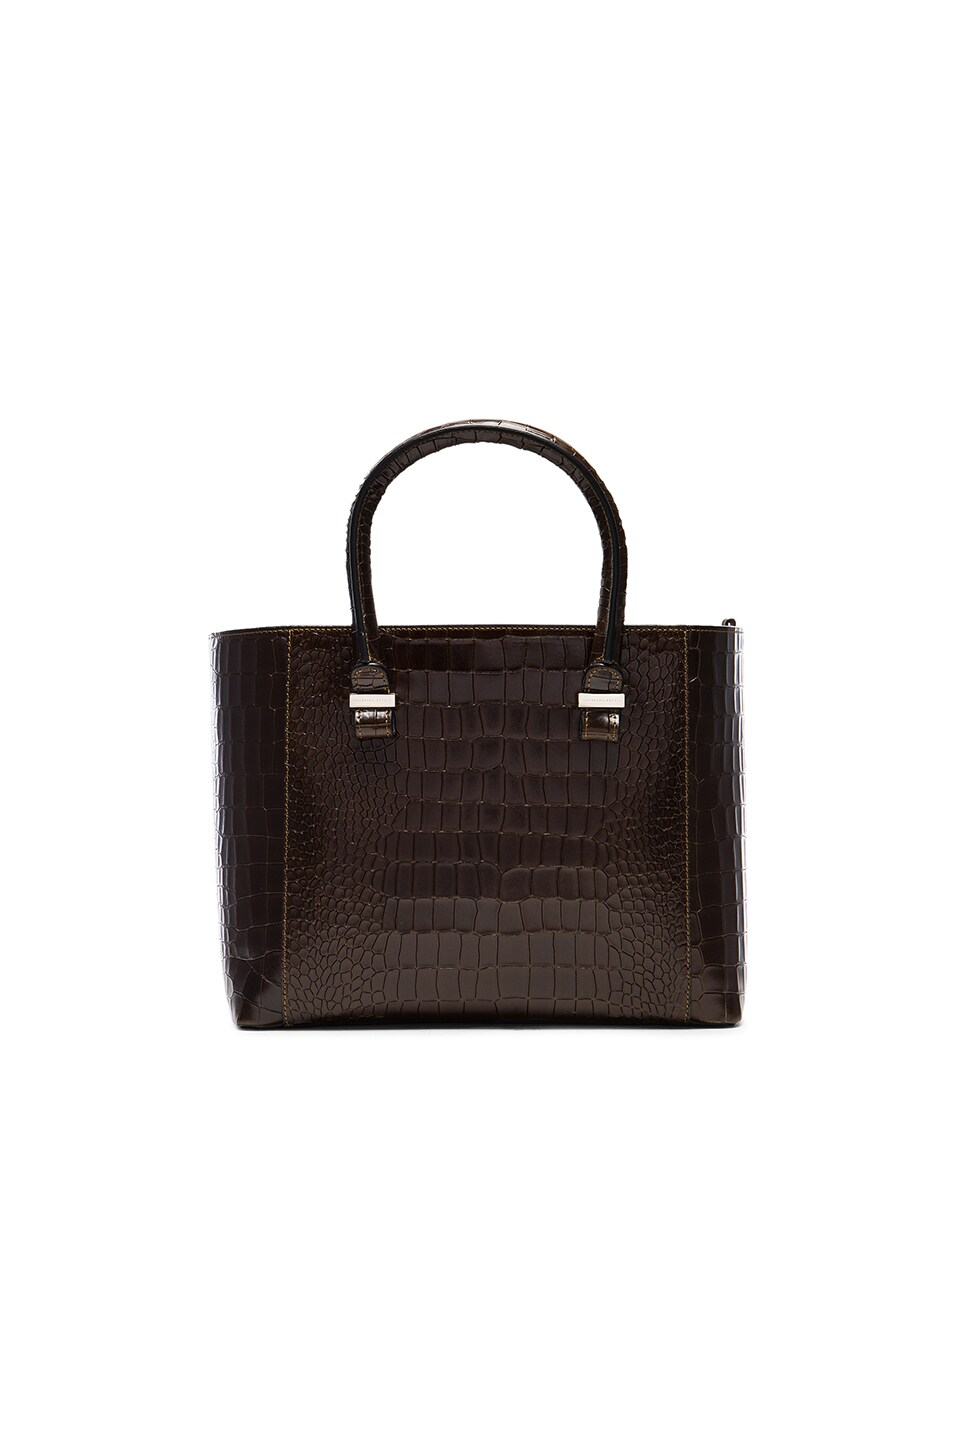 Image 1 of Victoria Beckham Printed Croc Quincy Tote in Olive Green